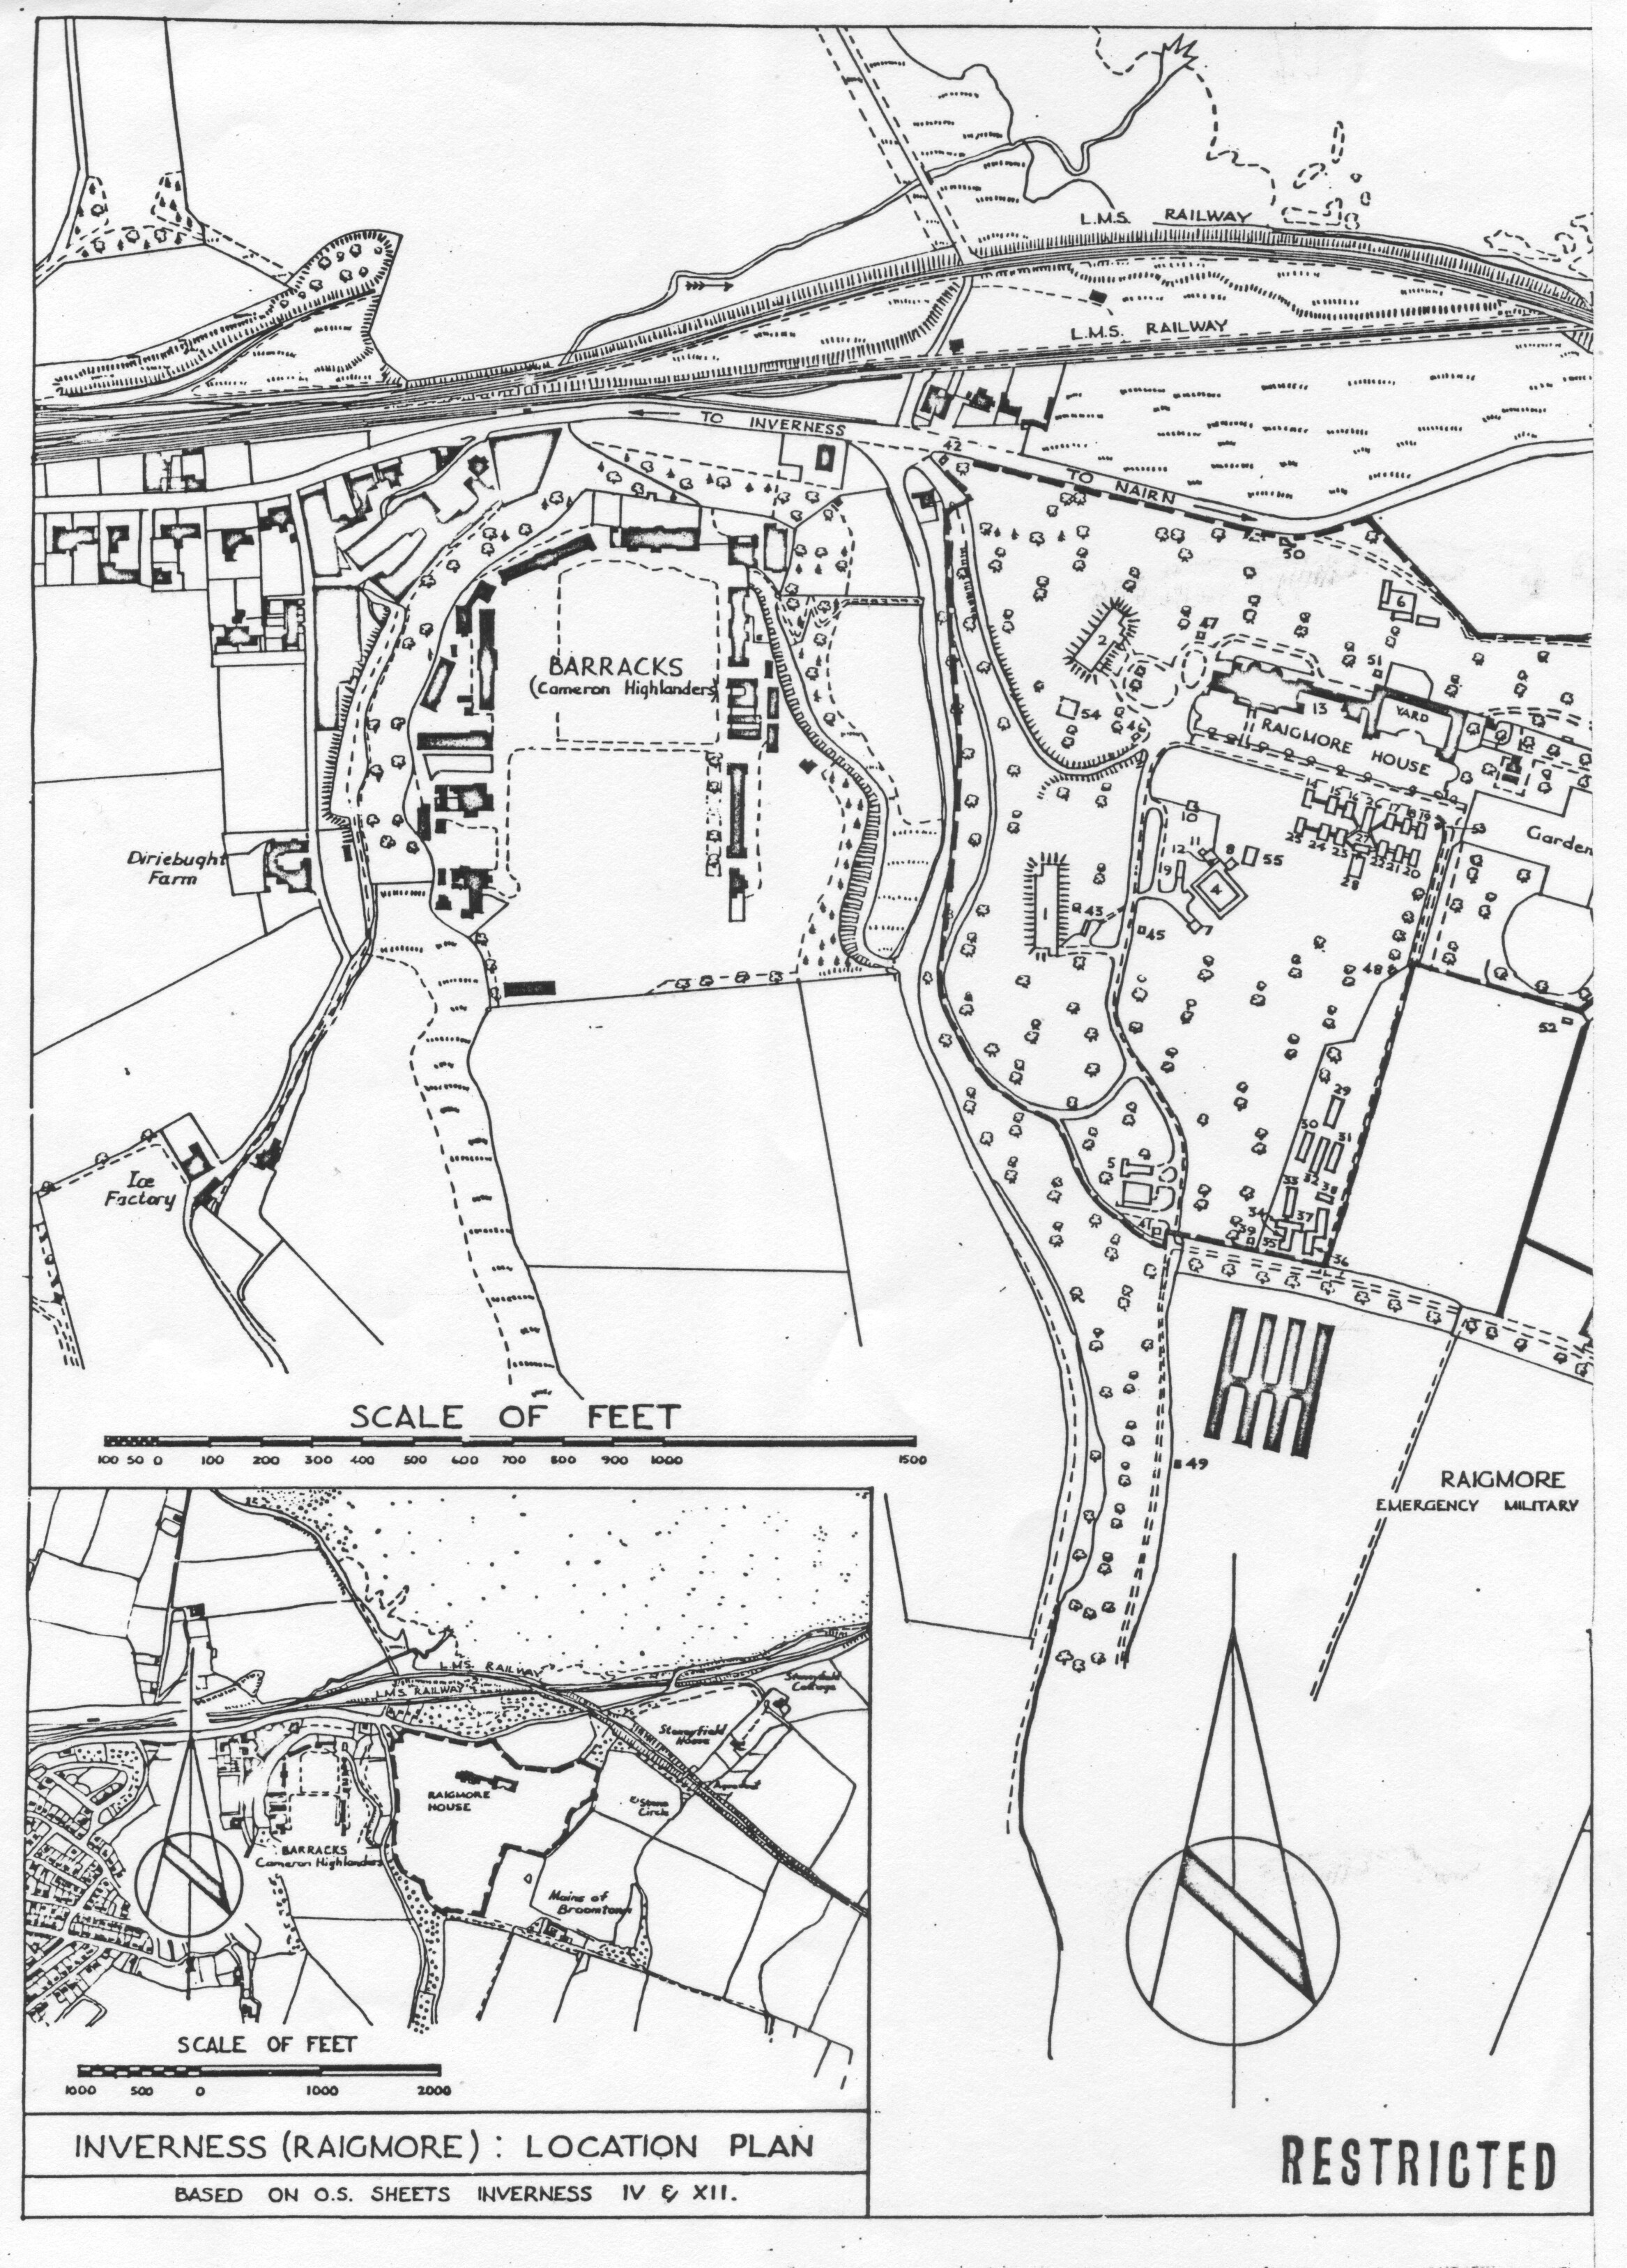 1940s restricted map Raigmore bunker and barracks